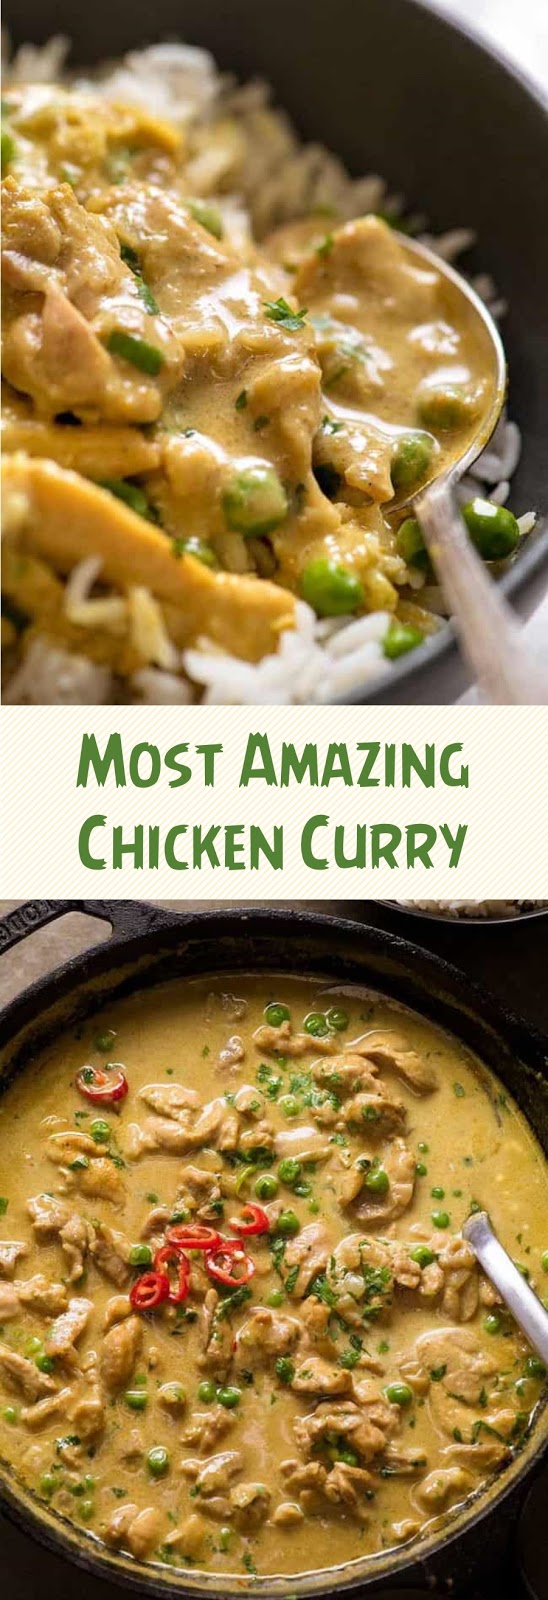 Most Amazing Chicken Curry